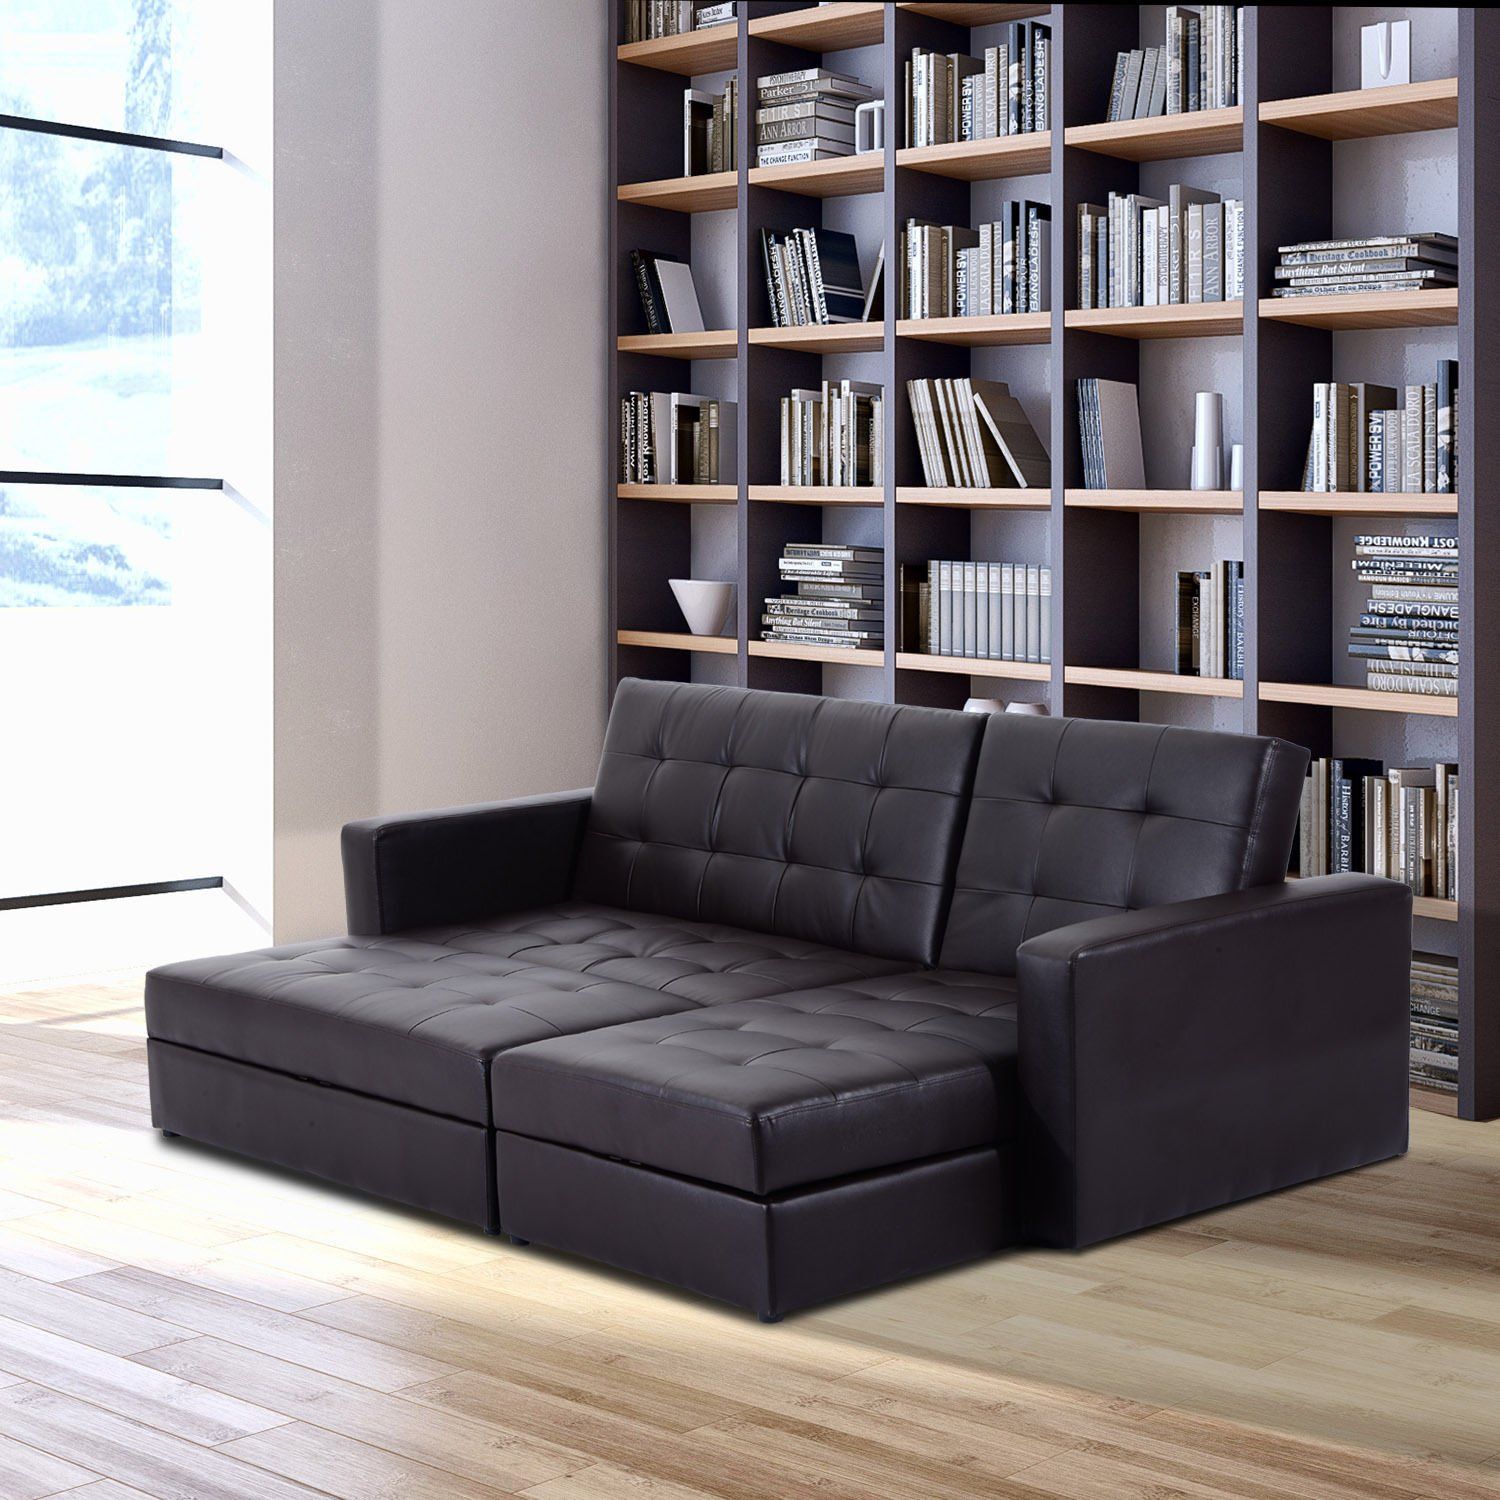 Storage+sleeper+couch+sofa+bed – Simply Style Inside Prato Storage Sectional Futon Sofas (View 11 of 15)